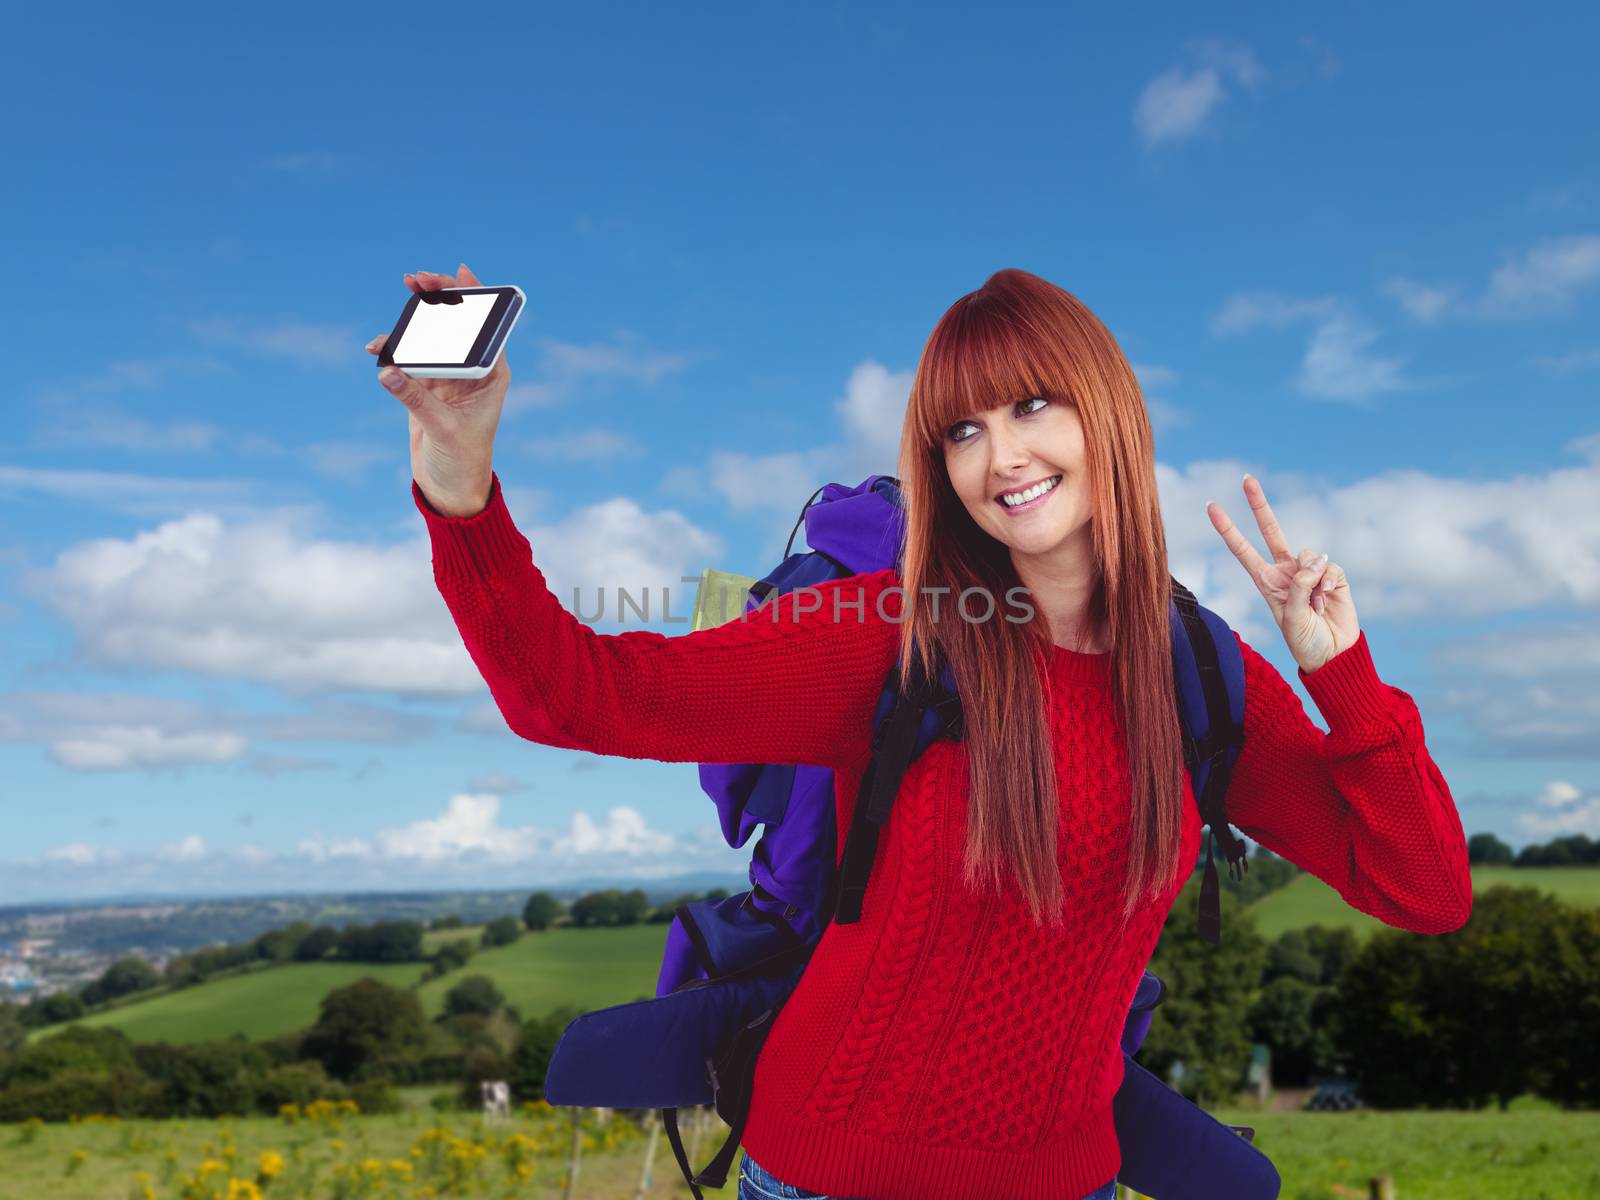 Smiling hipster woman with a travel bag taking selfie against countryside